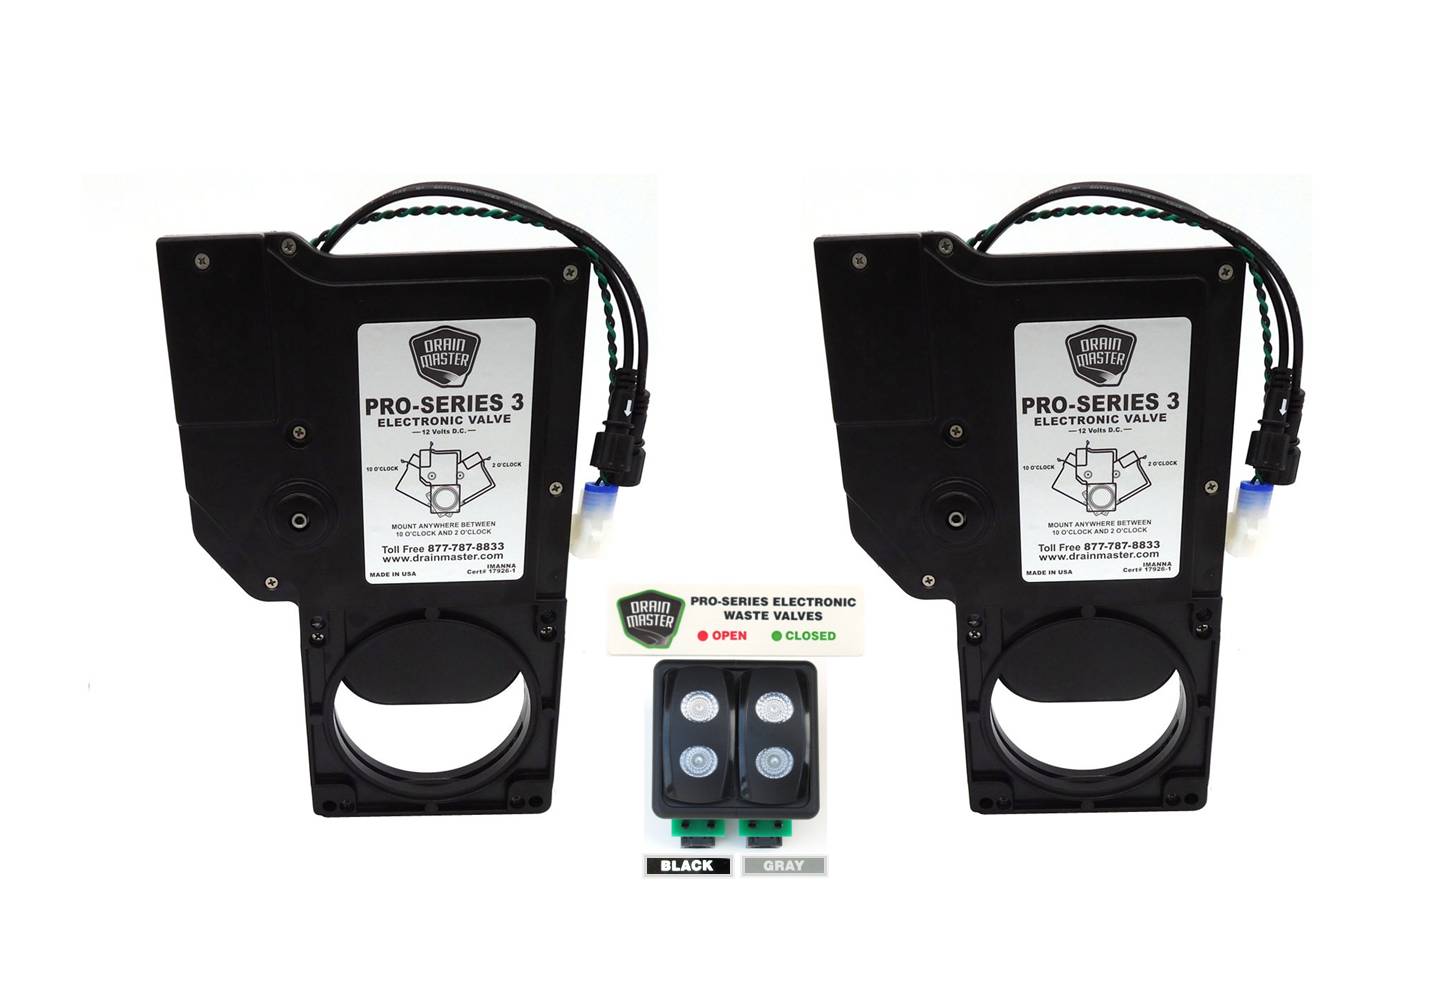 Drain Master Pro-Series Electronic Waste Valves for your RV Holding Tanks